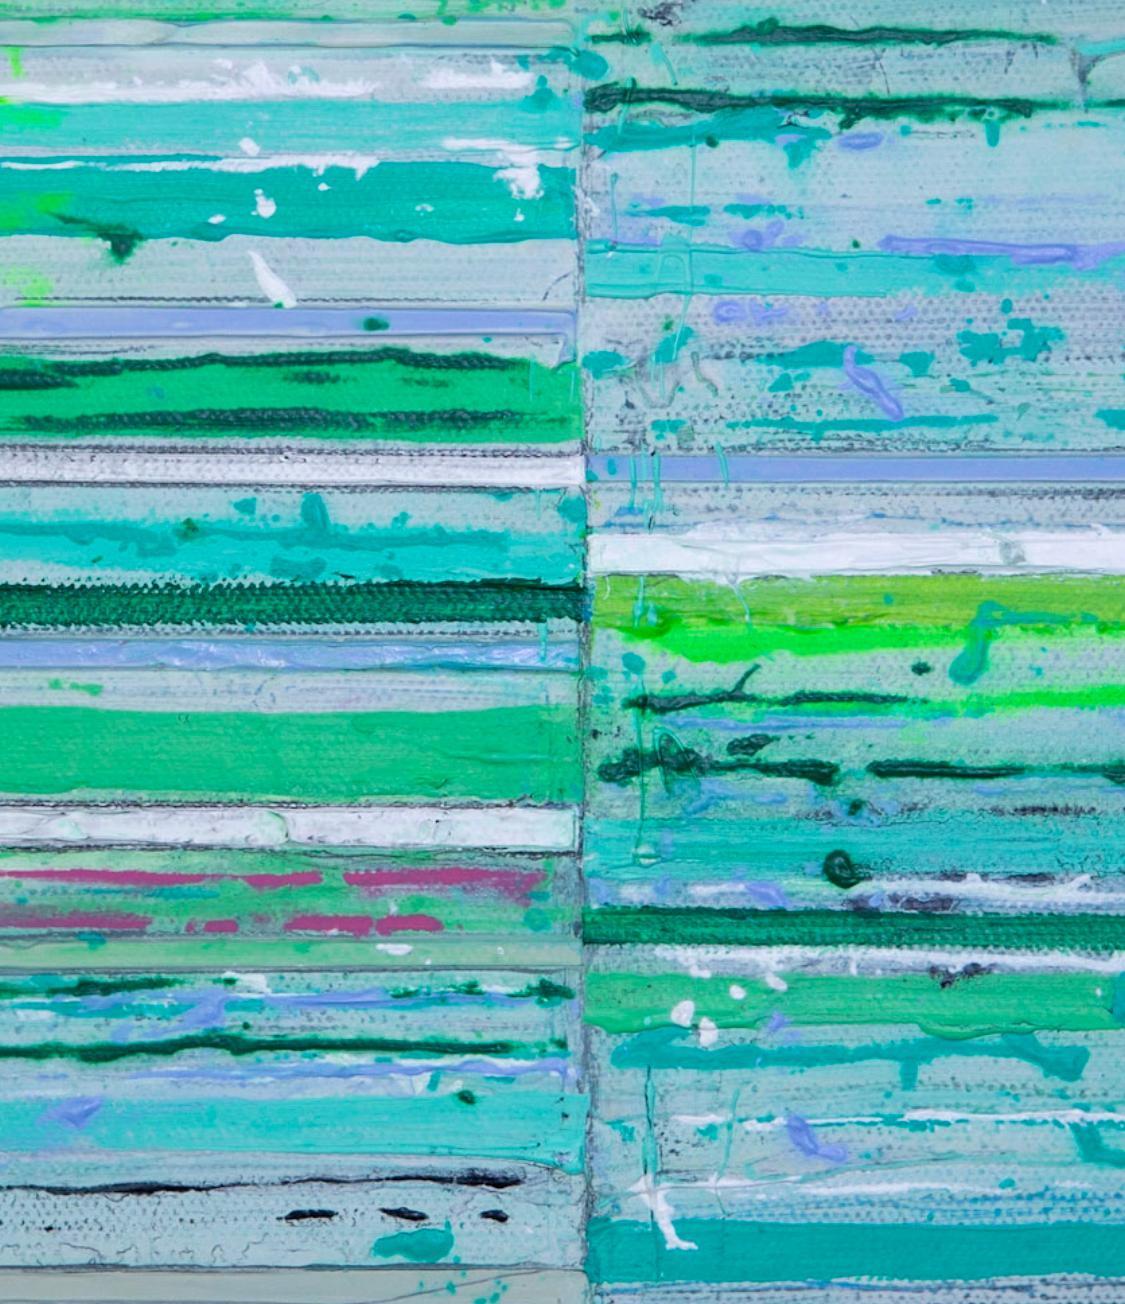 Ogham - Green striped abstract painting - Painting by Mark Zimmermann